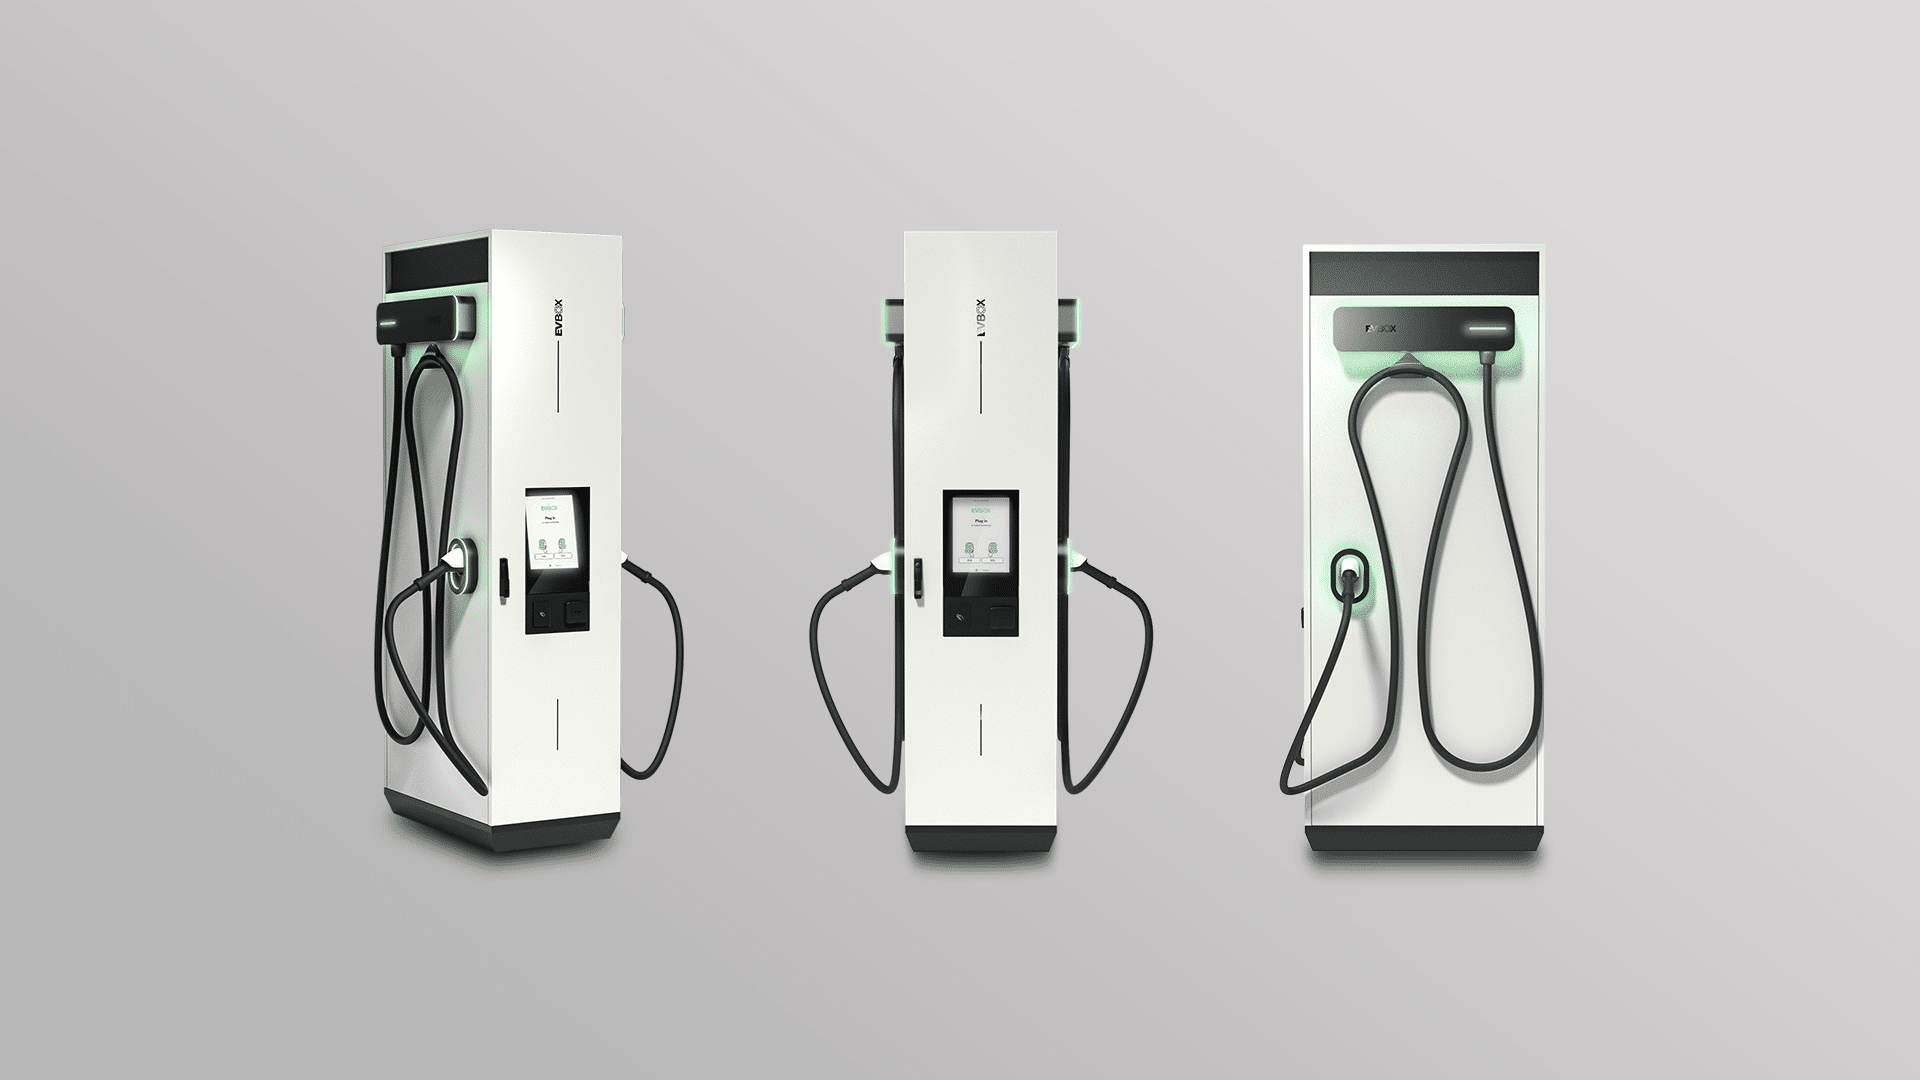 EVBox Group Introduces New Modular Fast Charging Station That Grows with its Customers’ Businesses